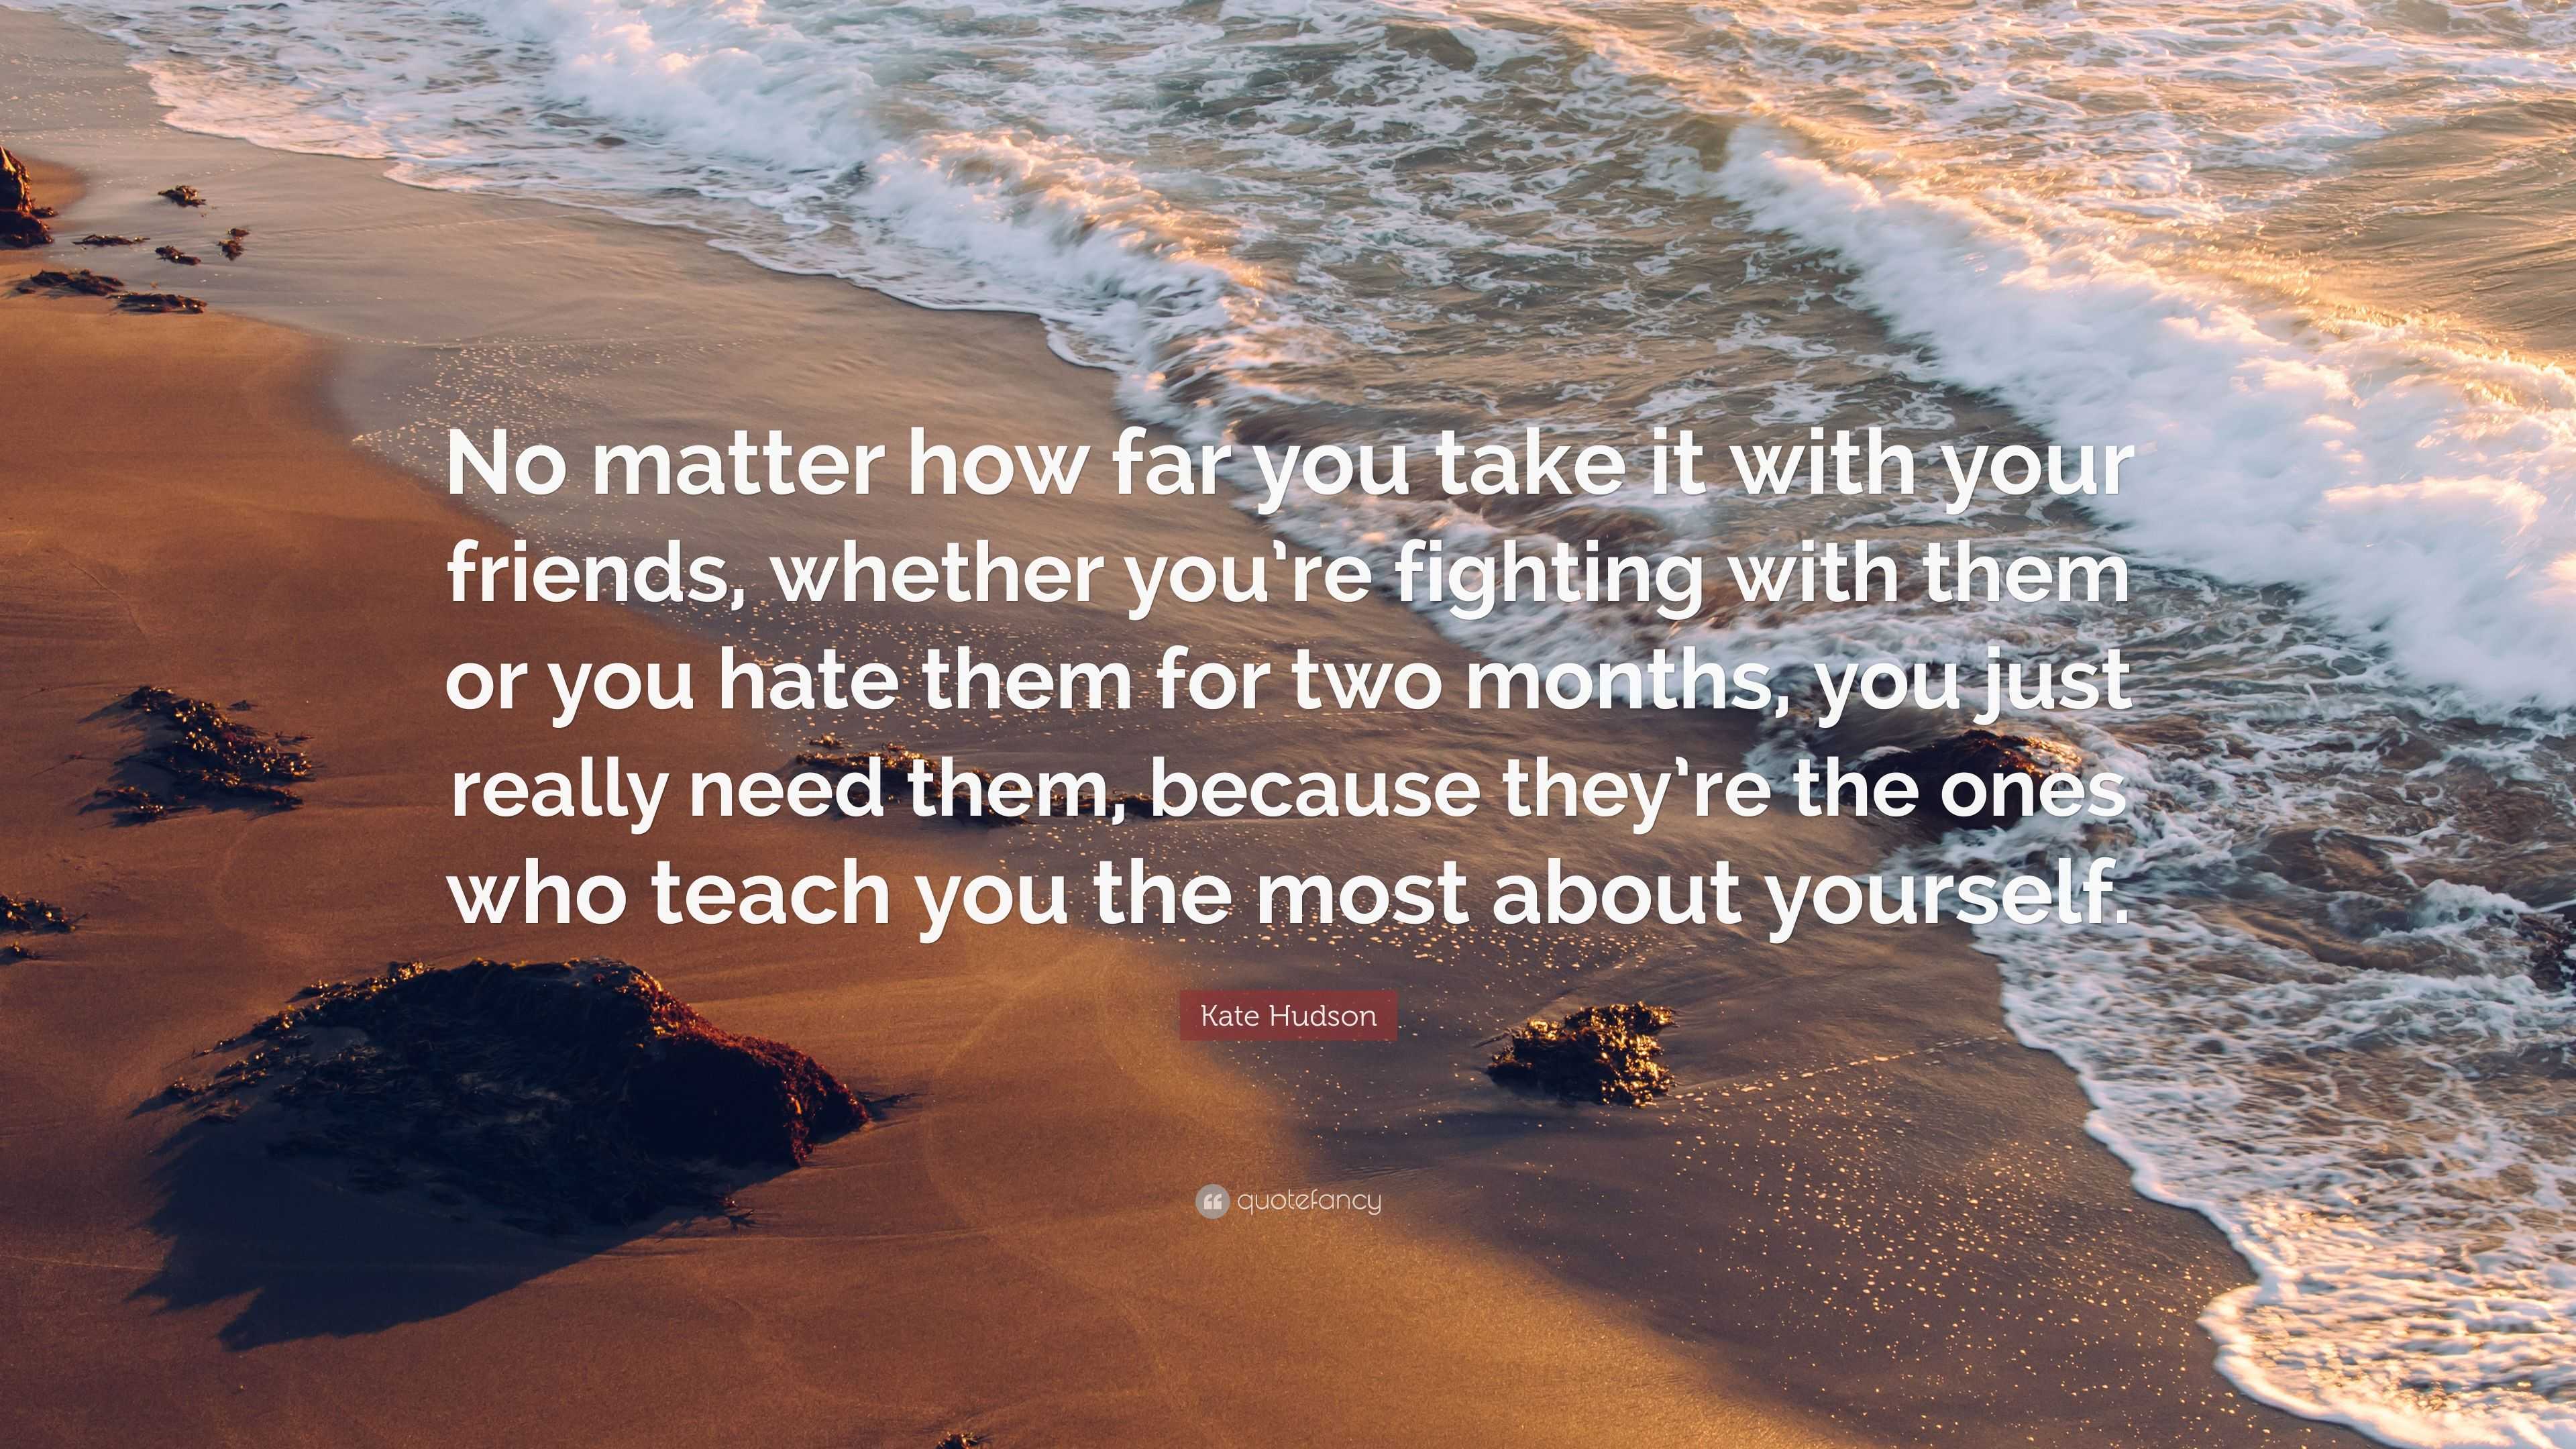 Kate Hudson Quote: “No matter how far you take it with your friends ...